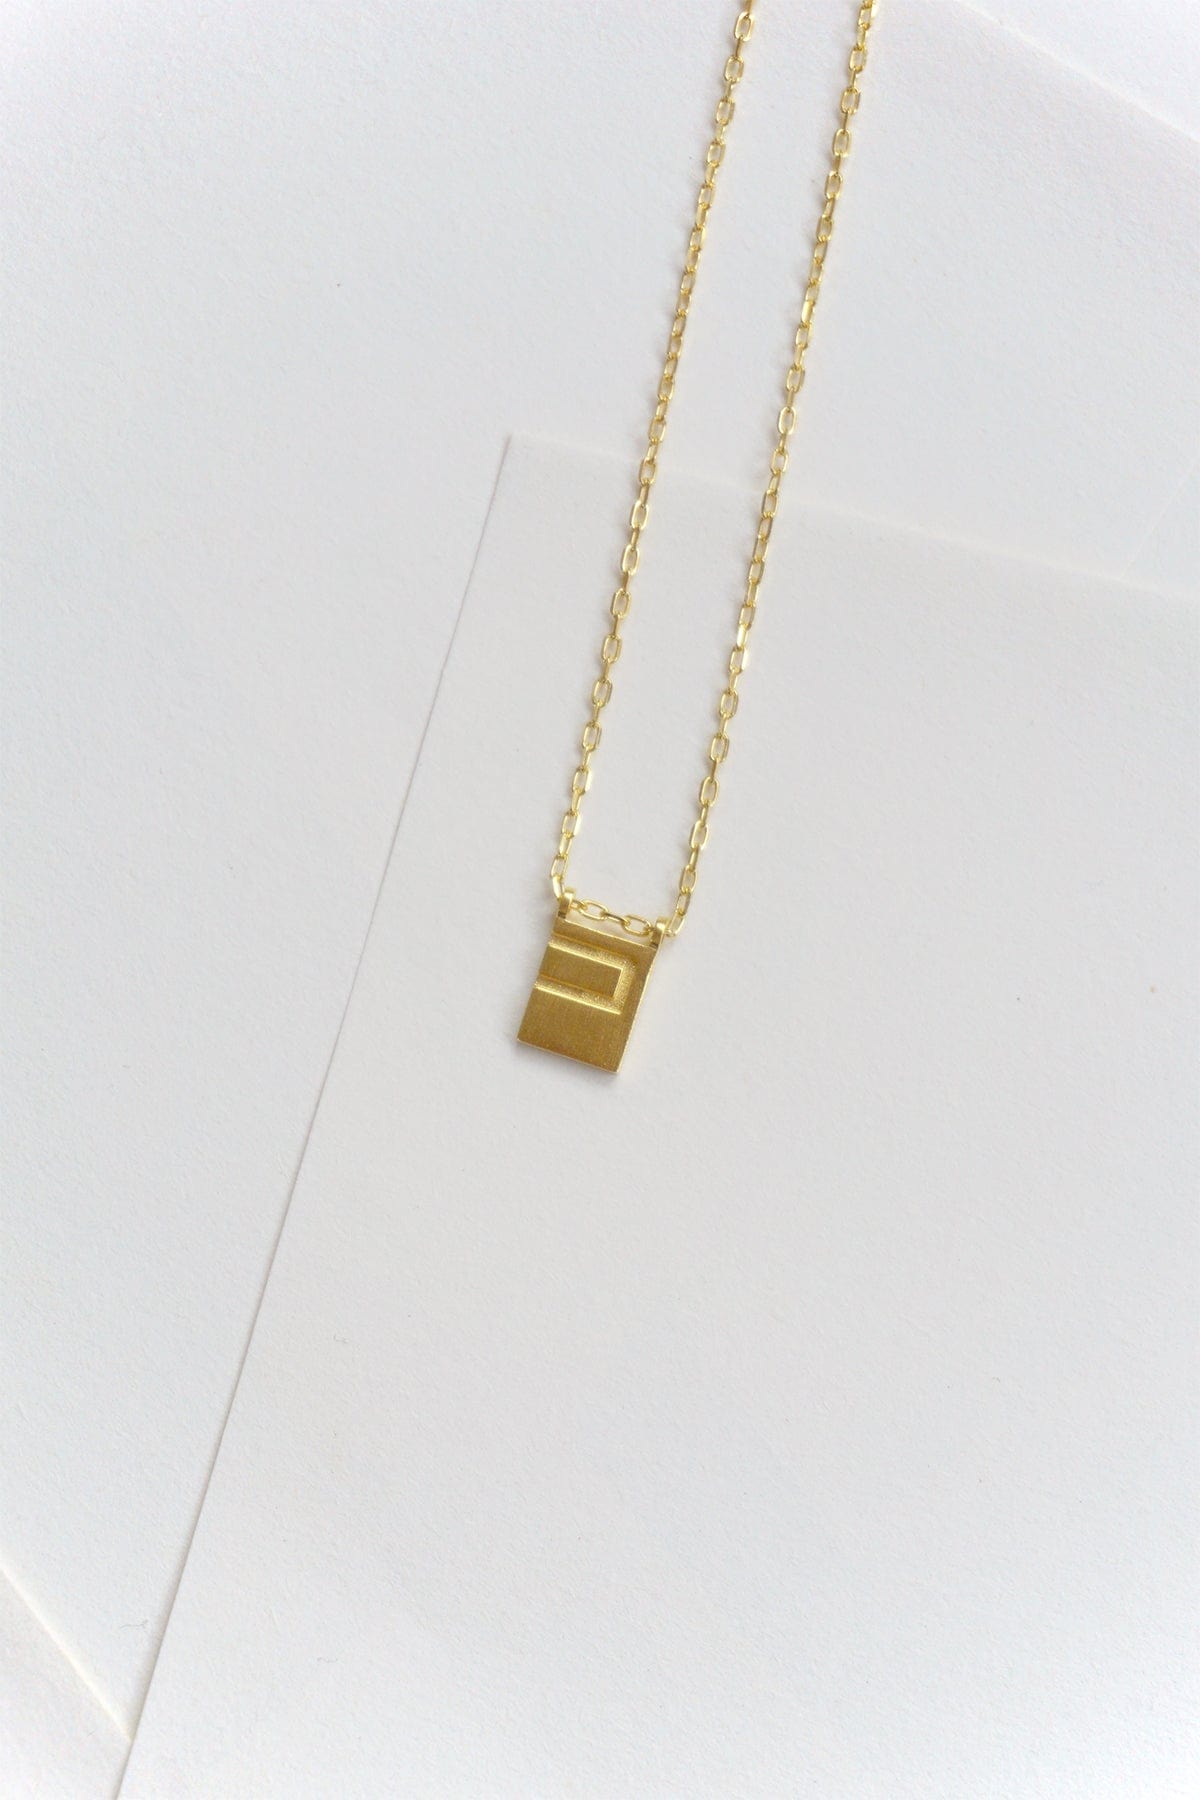 Initial Necklace - Gold Plated Gold / P AR.M ANNA ROSA MOSCHOUTI